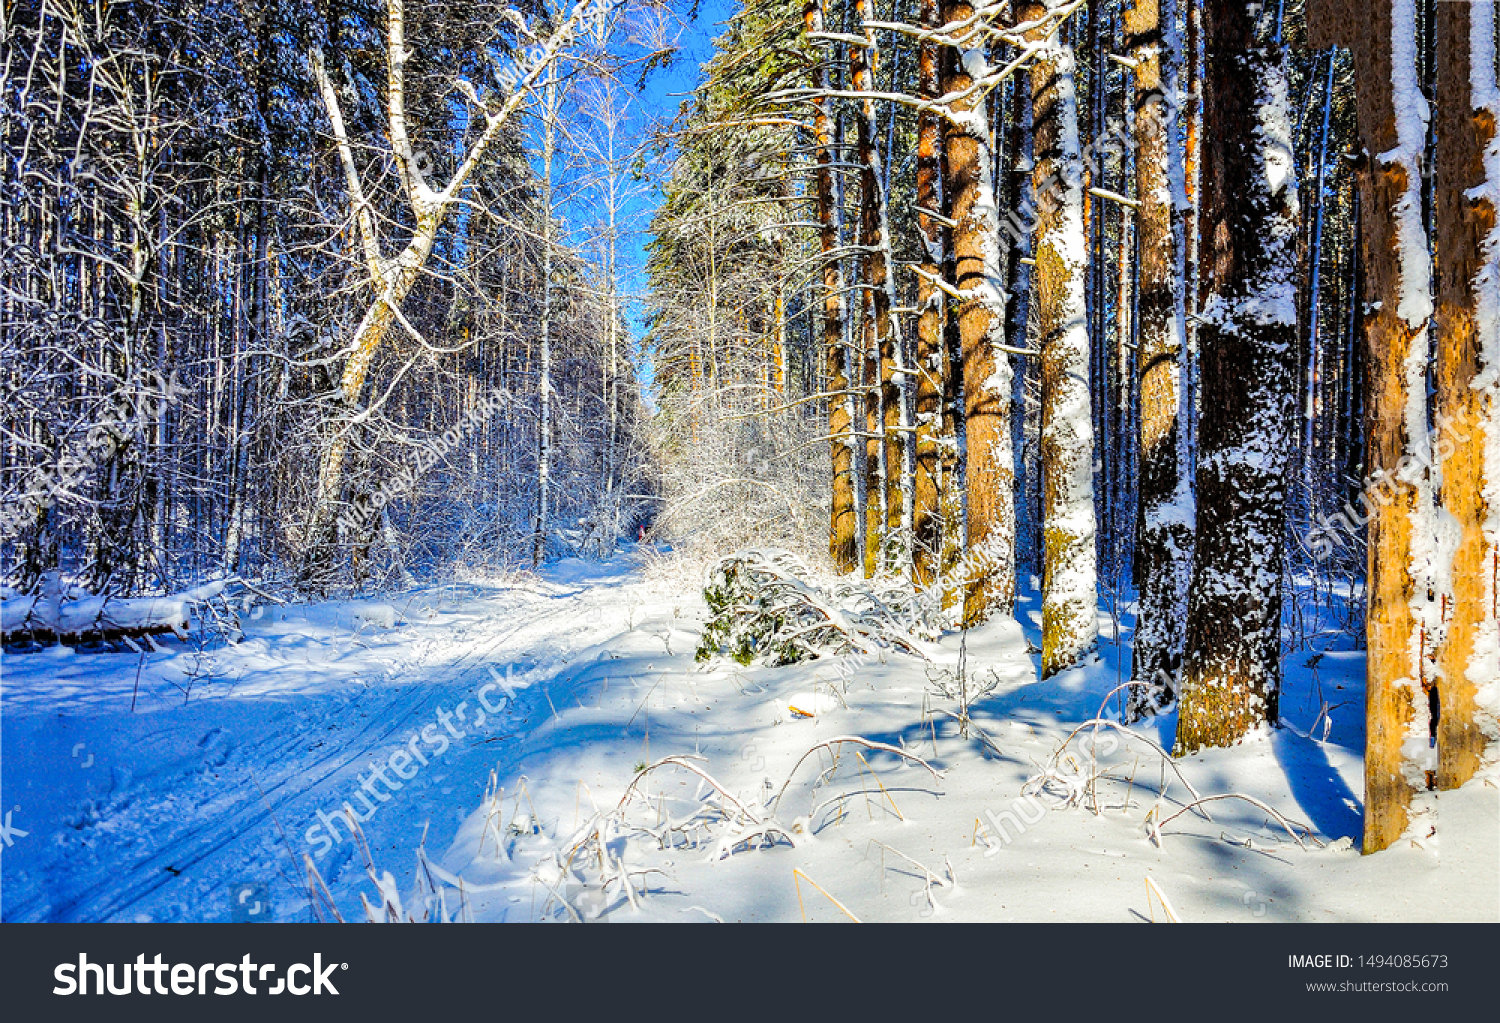 Winter snow forest road wintry landscape #1494085673